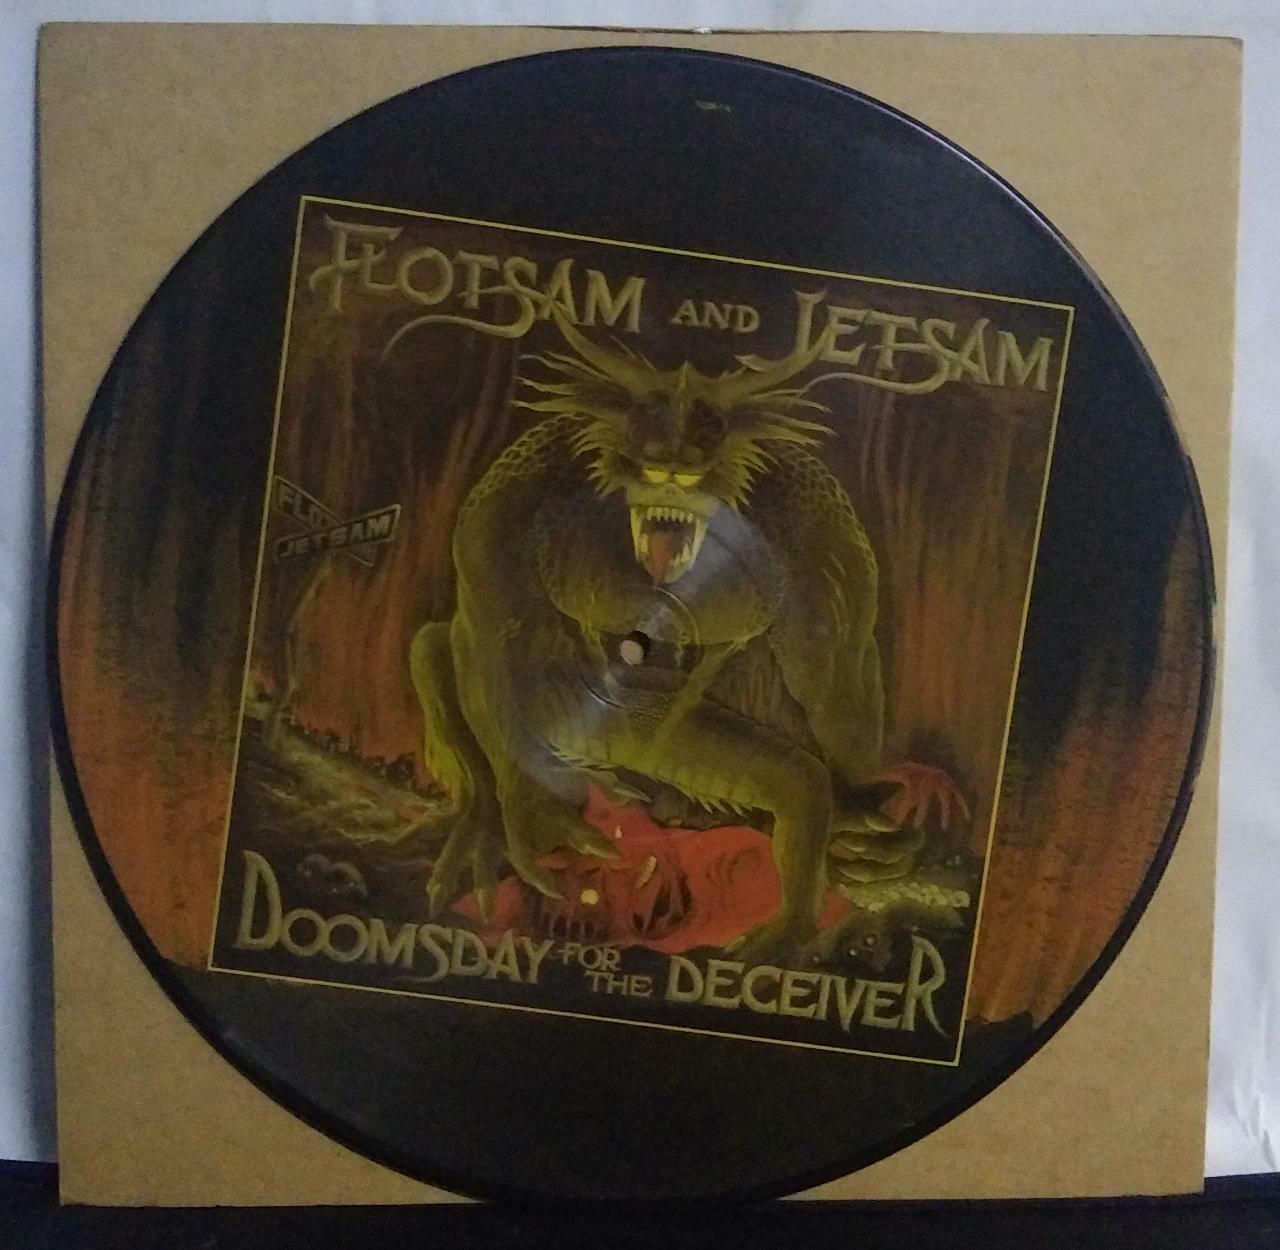 Vinil - Flotsam and Jetsam - Doomsday for the Deceiver (Picture/USA)